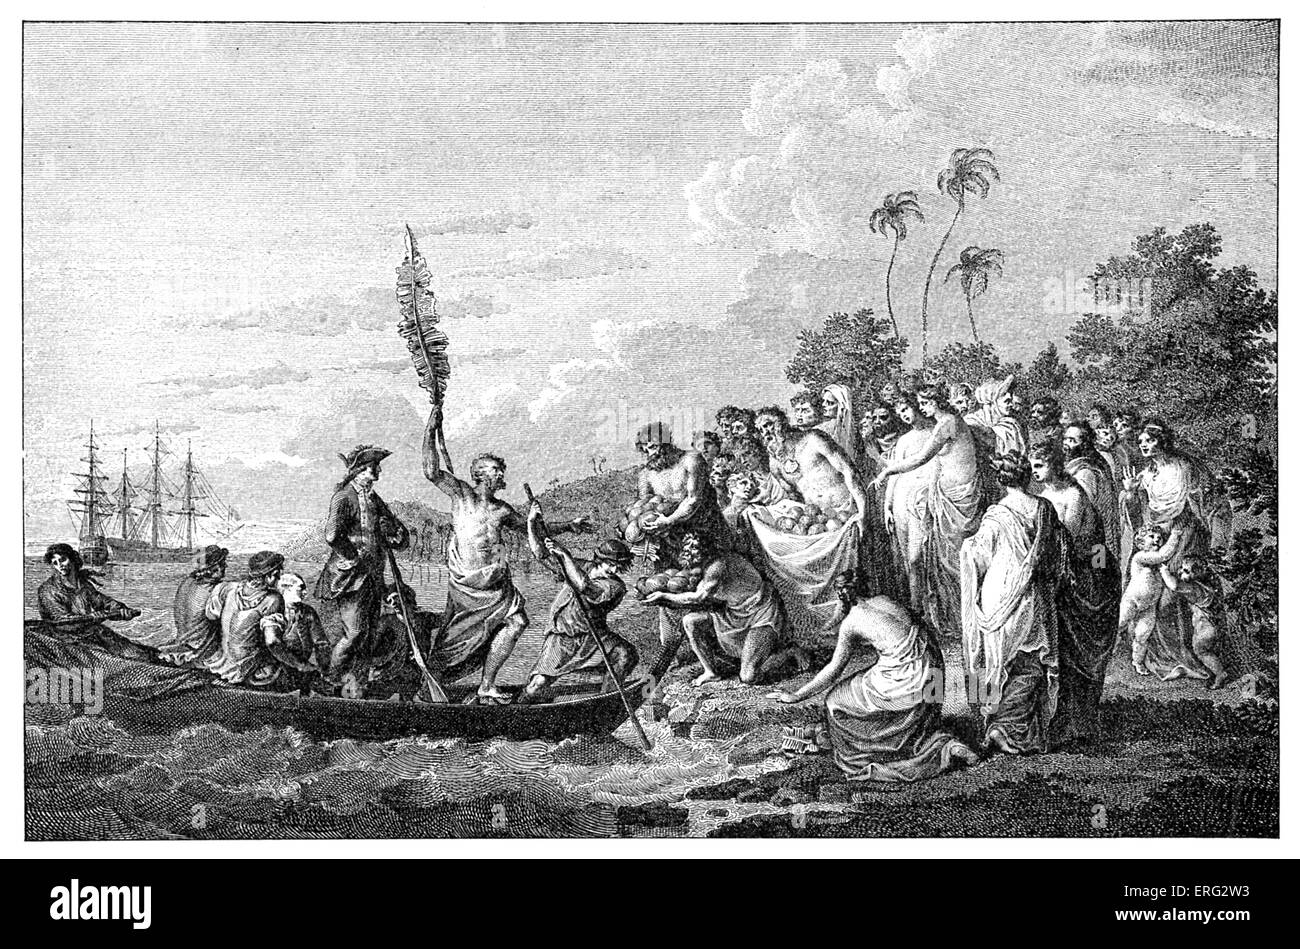 Captain Cook 's landing on the Friendly Islands, modern Tonga, greeted by Polynesian islanders. James Cook British explorer and cartographer 7 November 1728 - 14 February 1779. Stock Photo